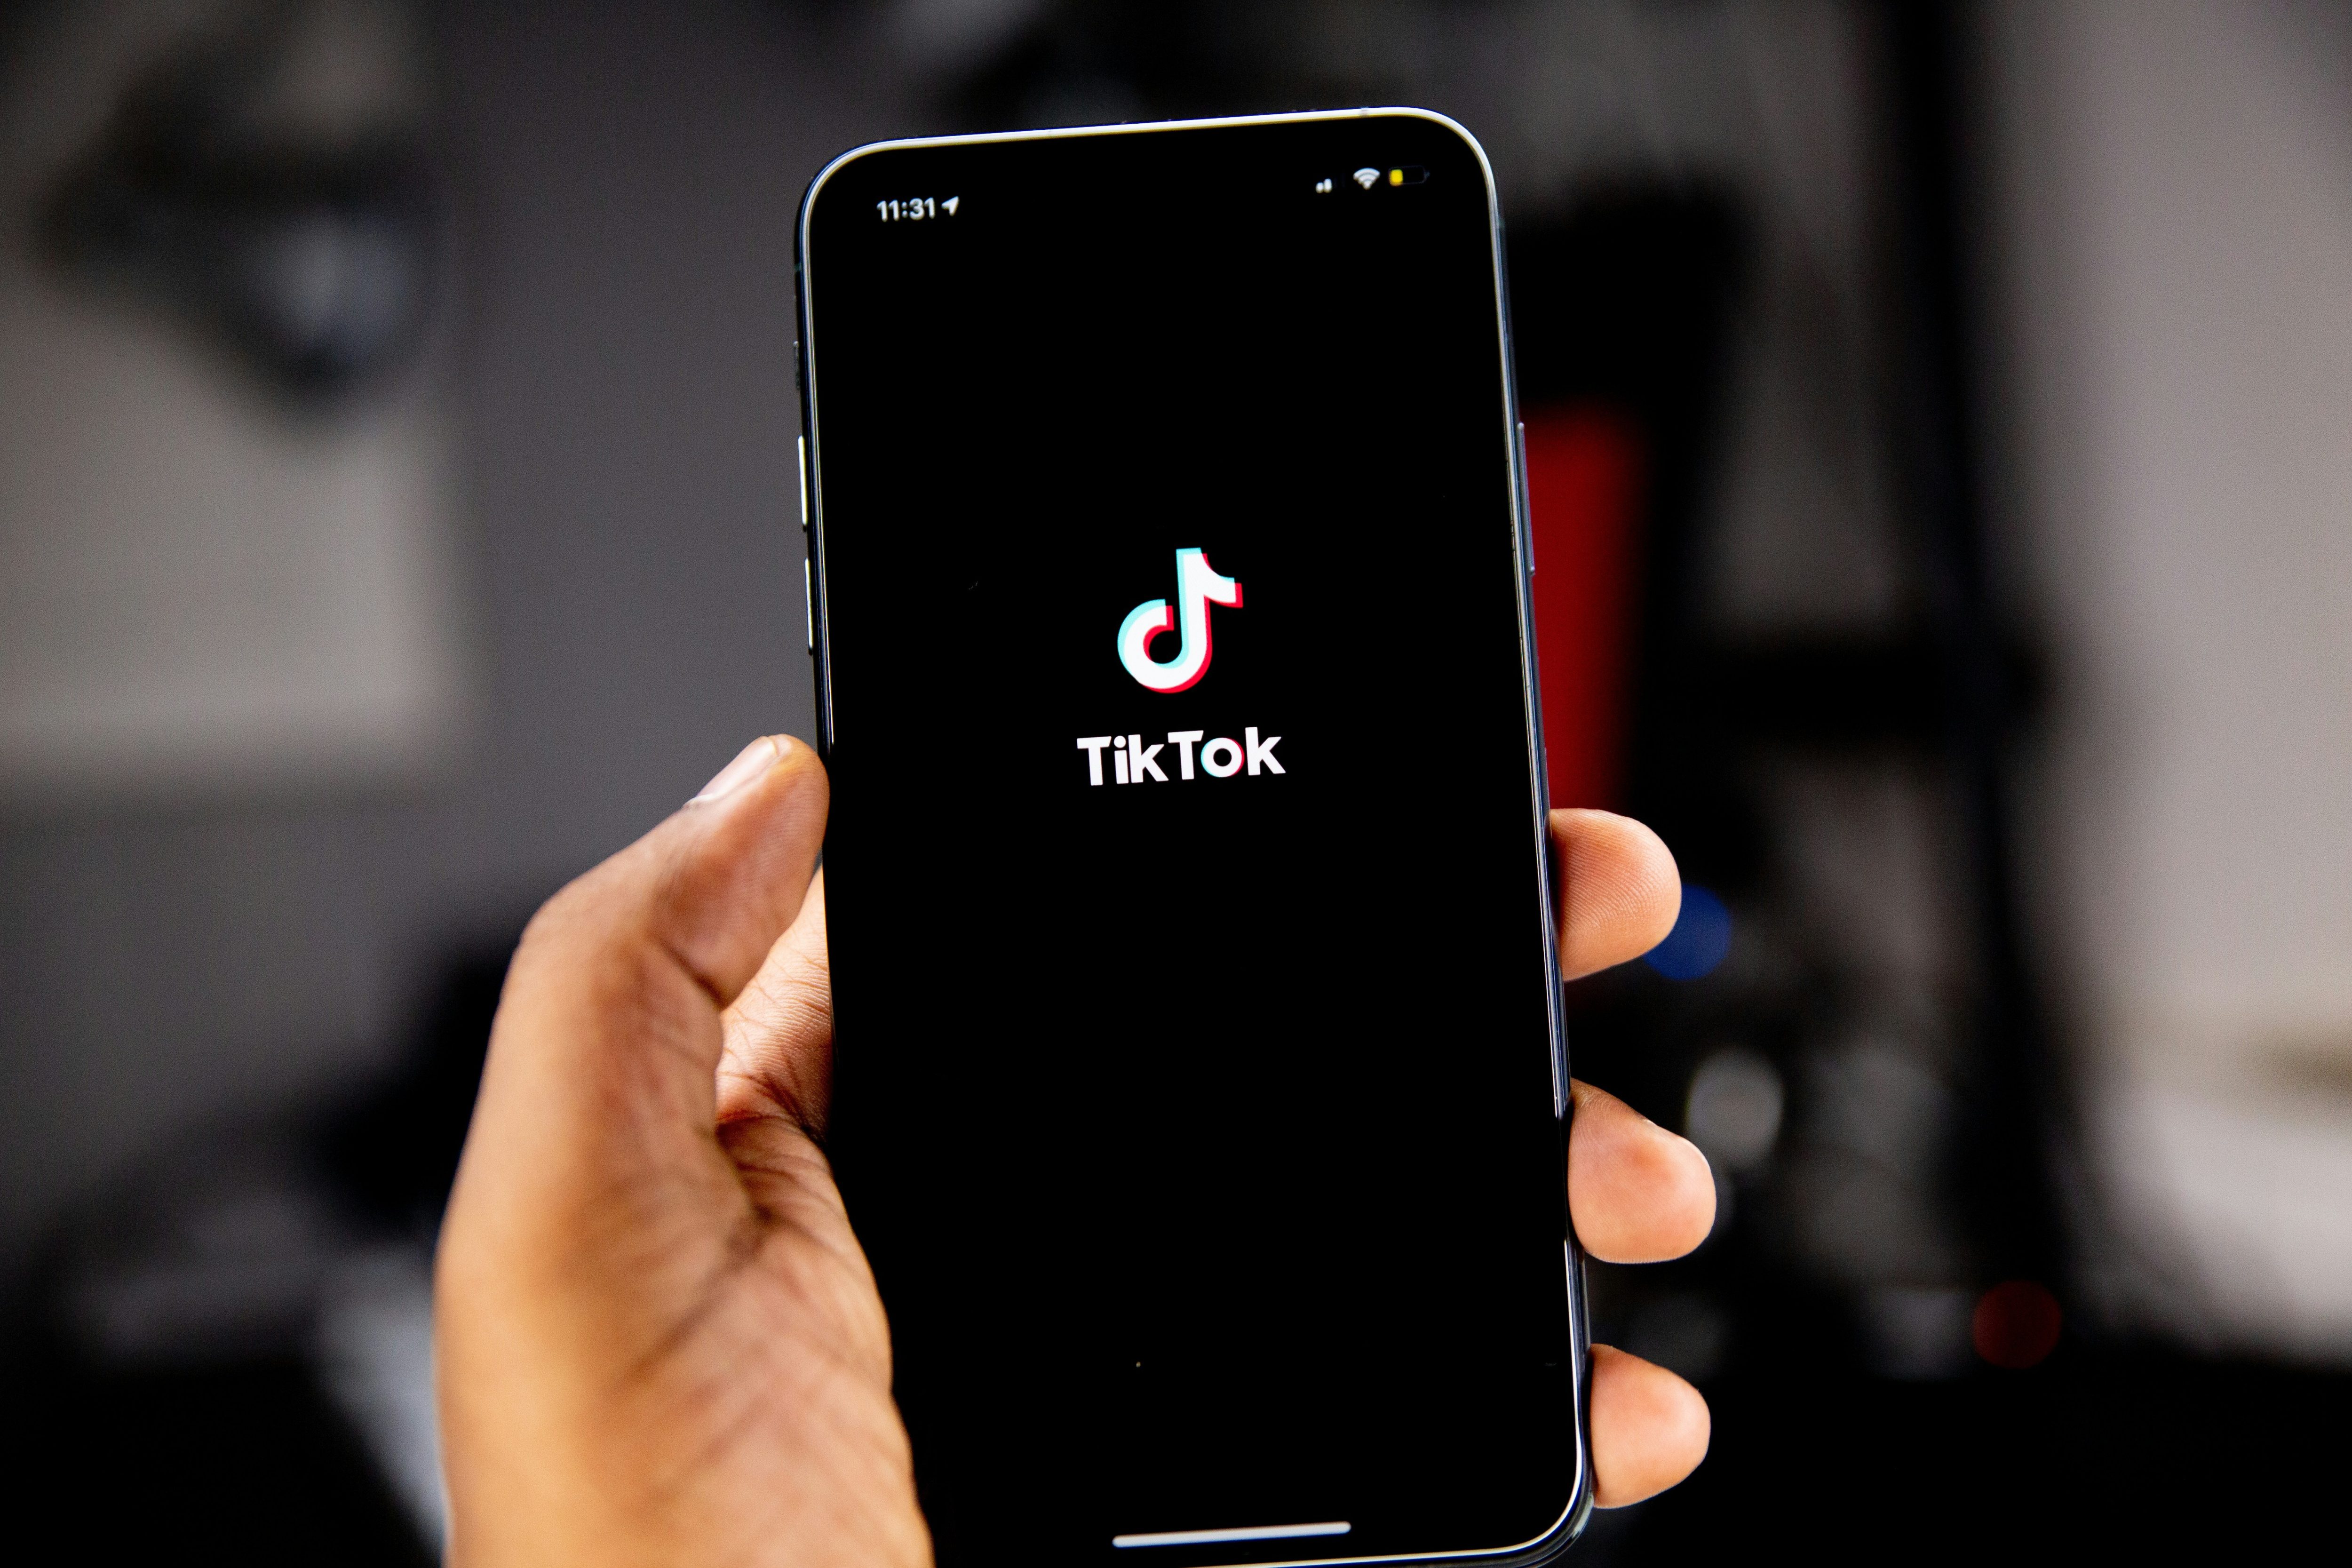 TikTok Shop: An eCommerce opportunity yet to be seen